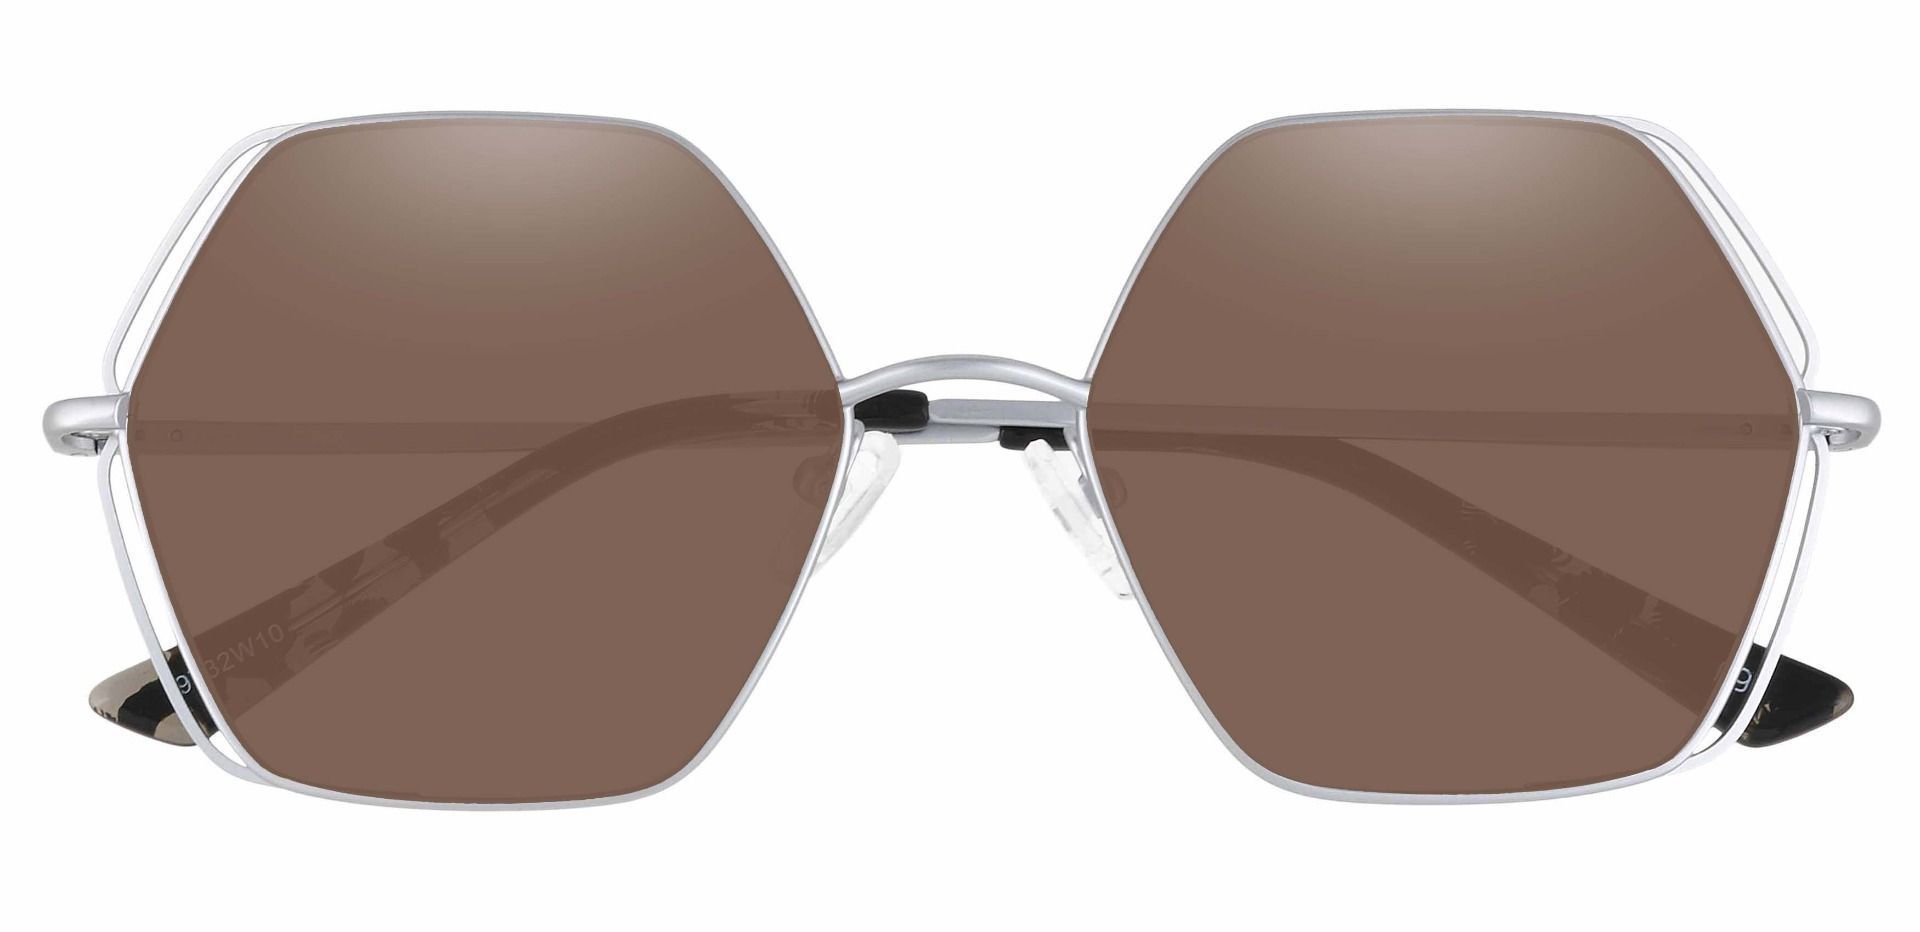 Hawley Geometric Lined Bifocal Sunglasses - Silver Frame With Brown Lenses